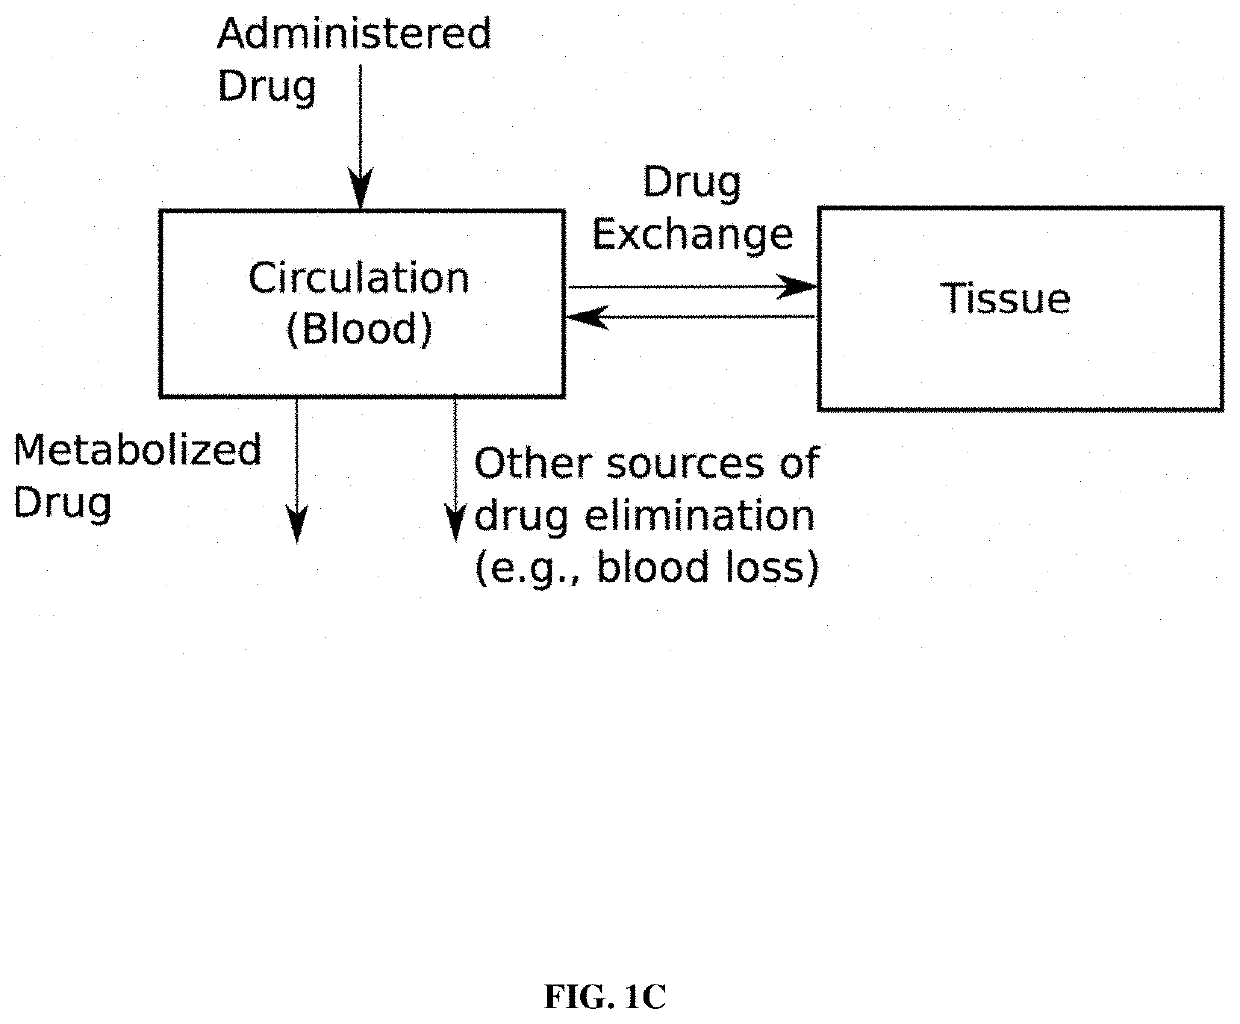 Hierarchical adaptive closed-loop fluid resuscitation and cardiovascular drug administration system